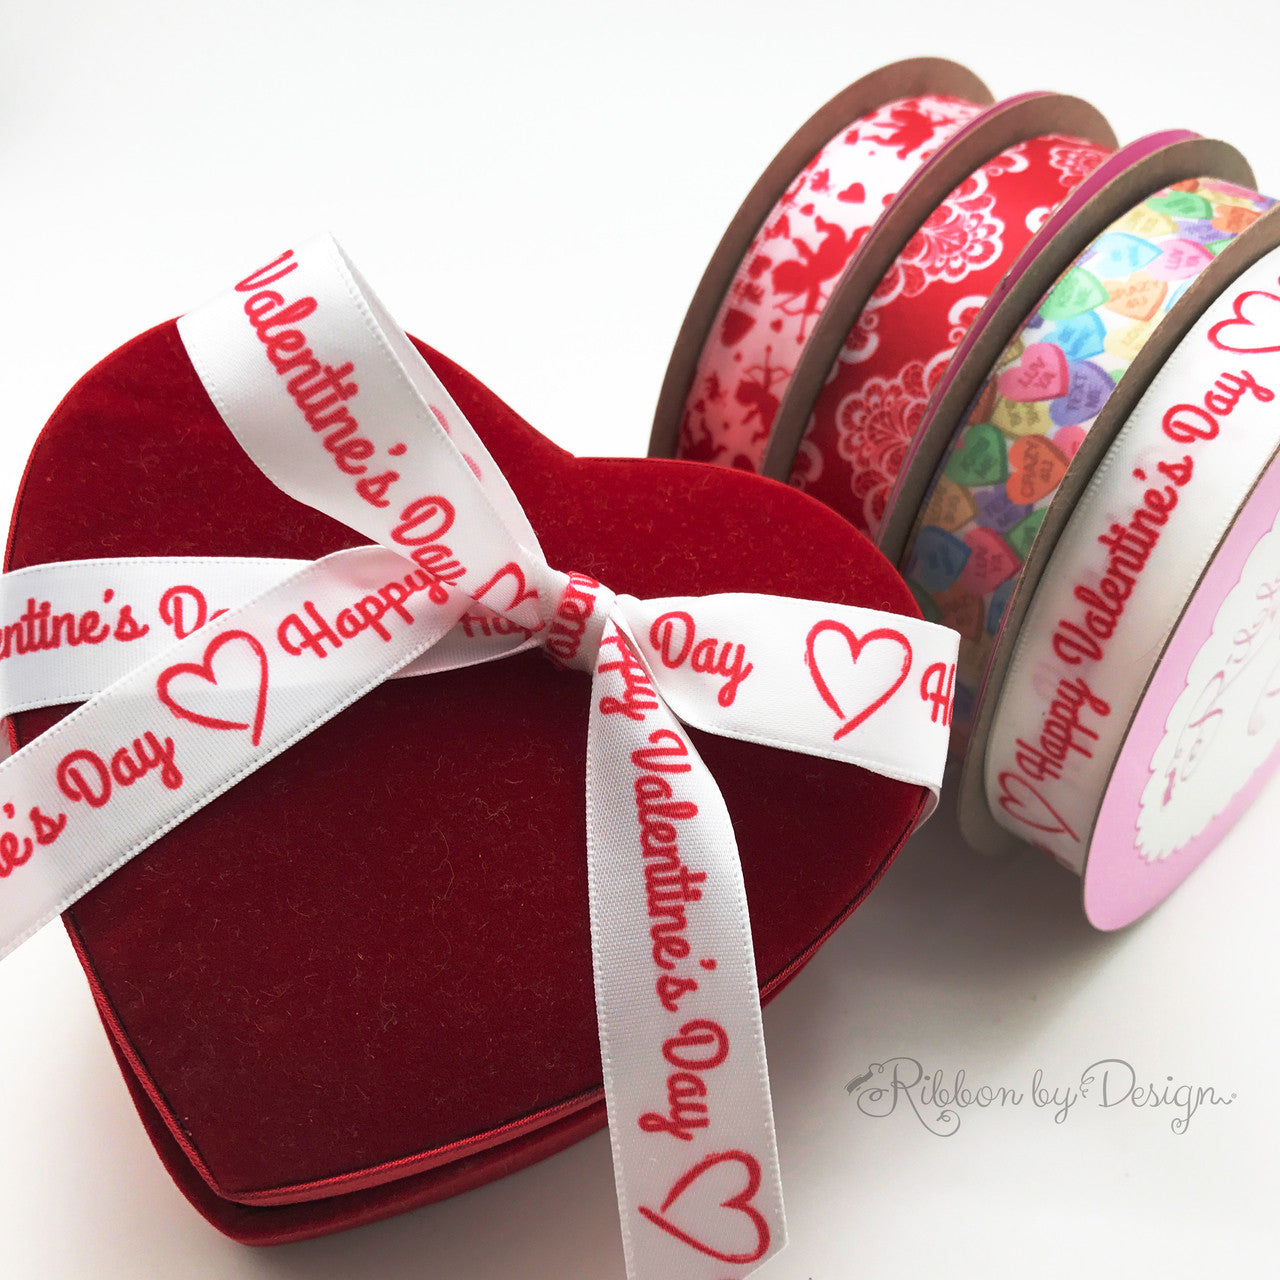 Happy Valentine's Day Ribbon with hearts in red printed on 5/8 white  single face satin